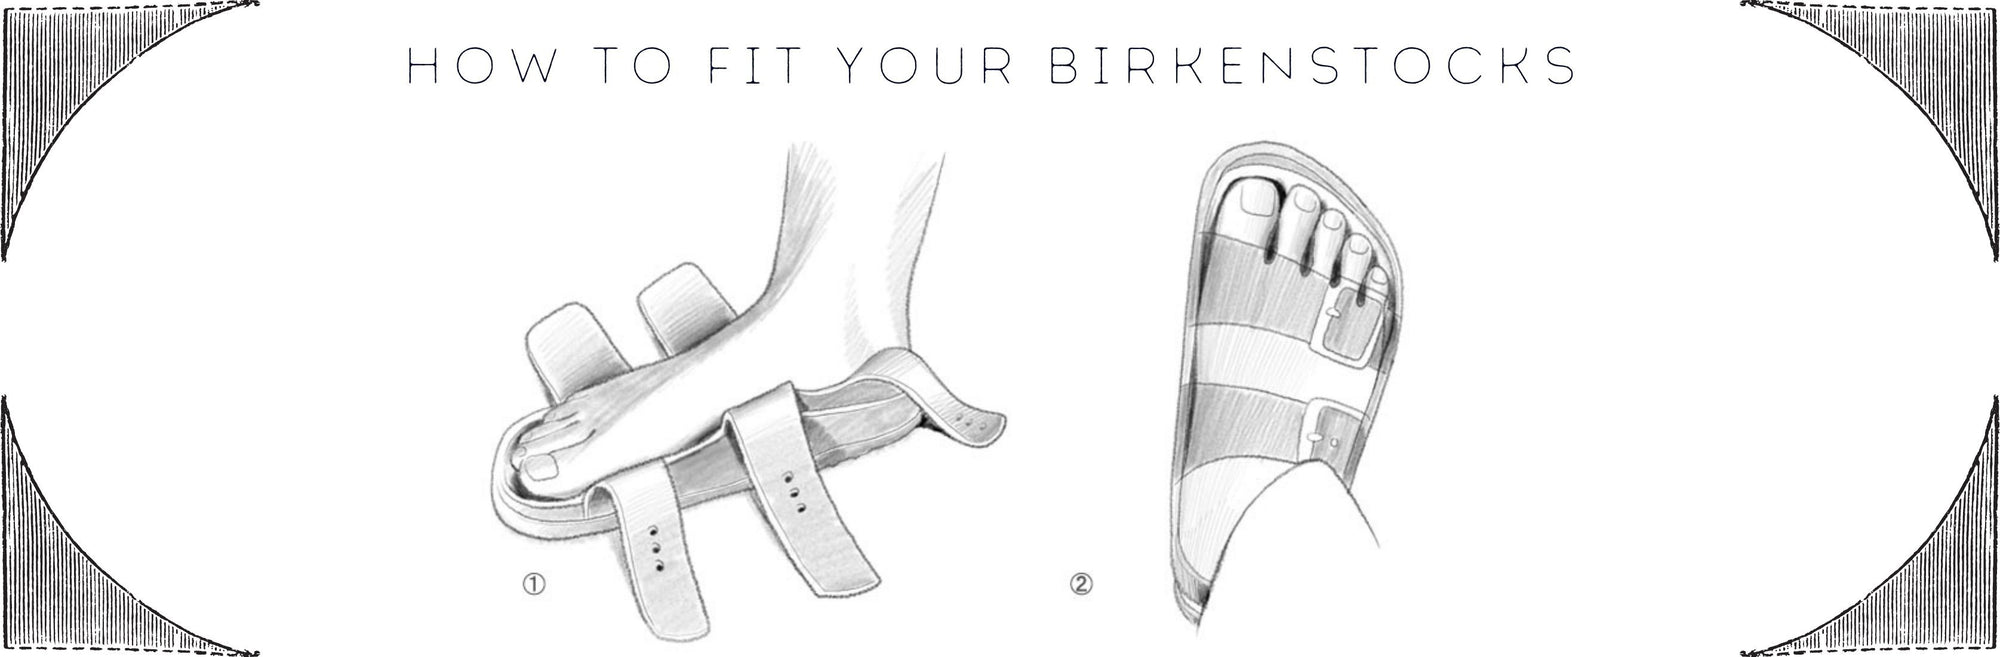 How to fit your Birkenstocks